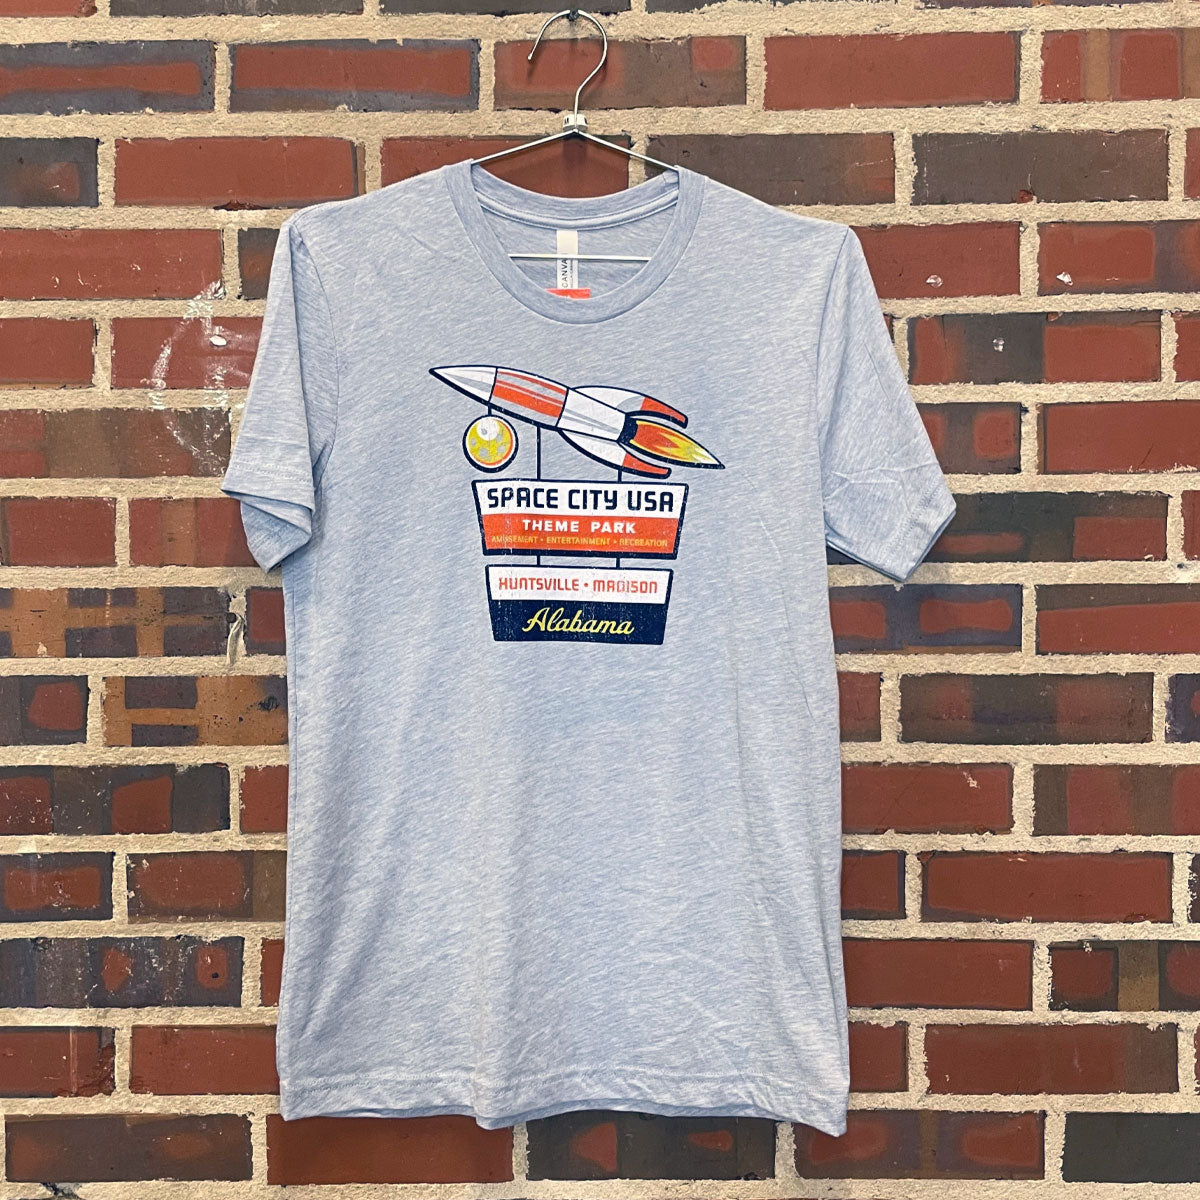 Image of fun retro Space City USA theme park design on light heather blue t-shirt hanging against brick wall at Lowe Mill